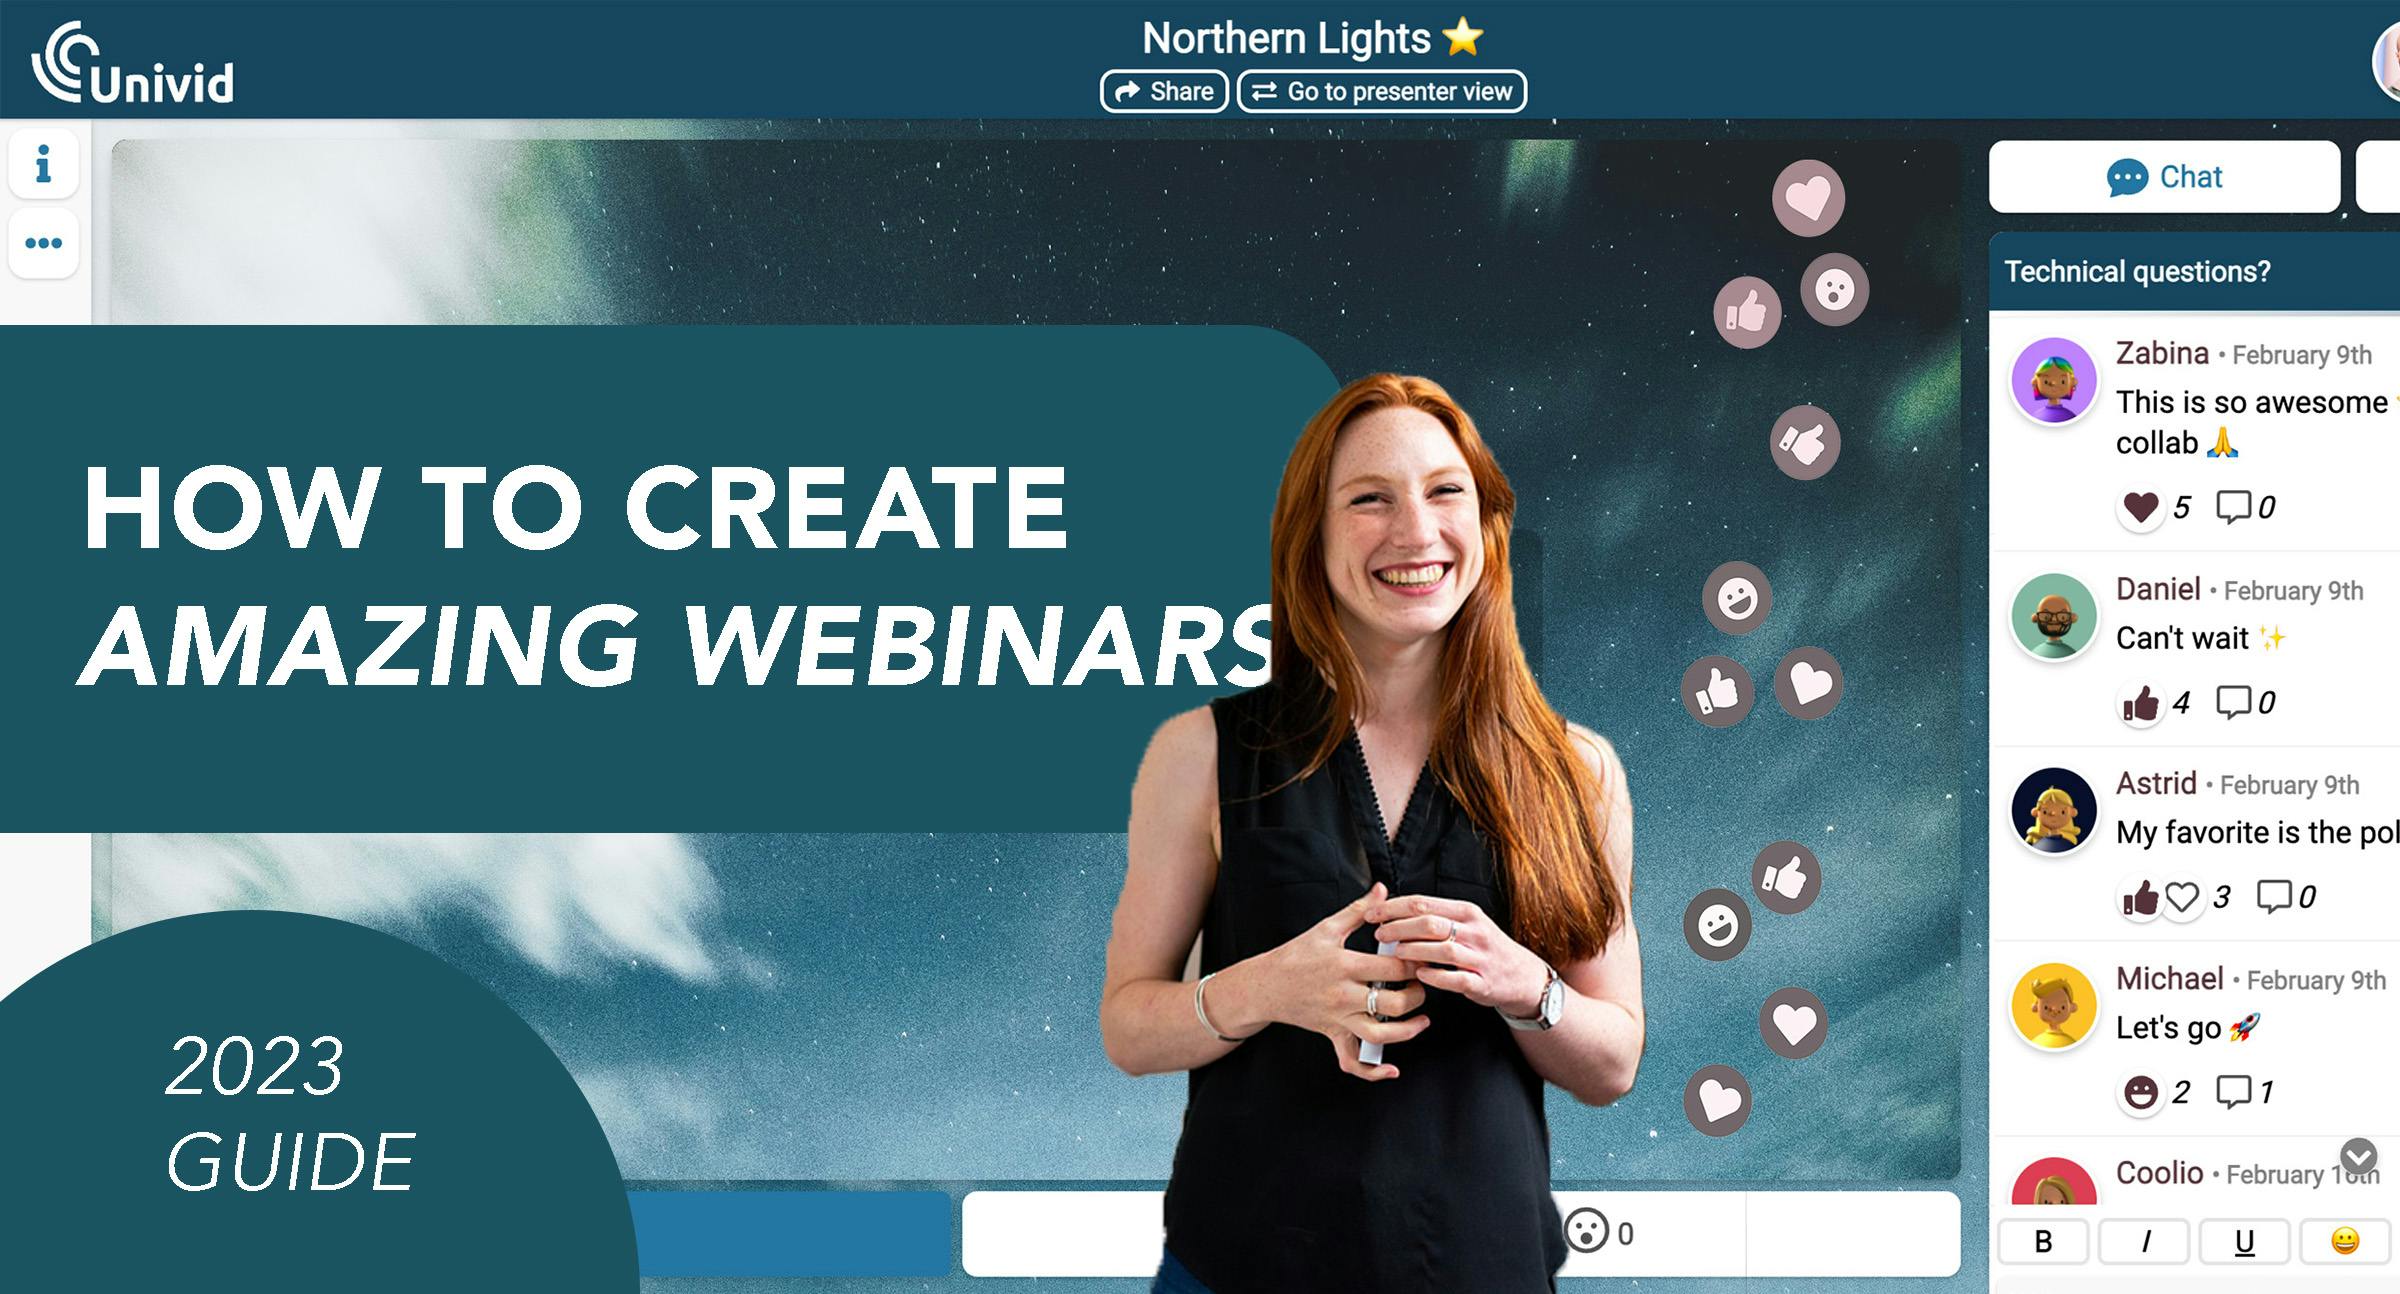 Convert more leads by engaging and educating your target group. Here are 10 easy steps to create the perfect webinar in 2023.